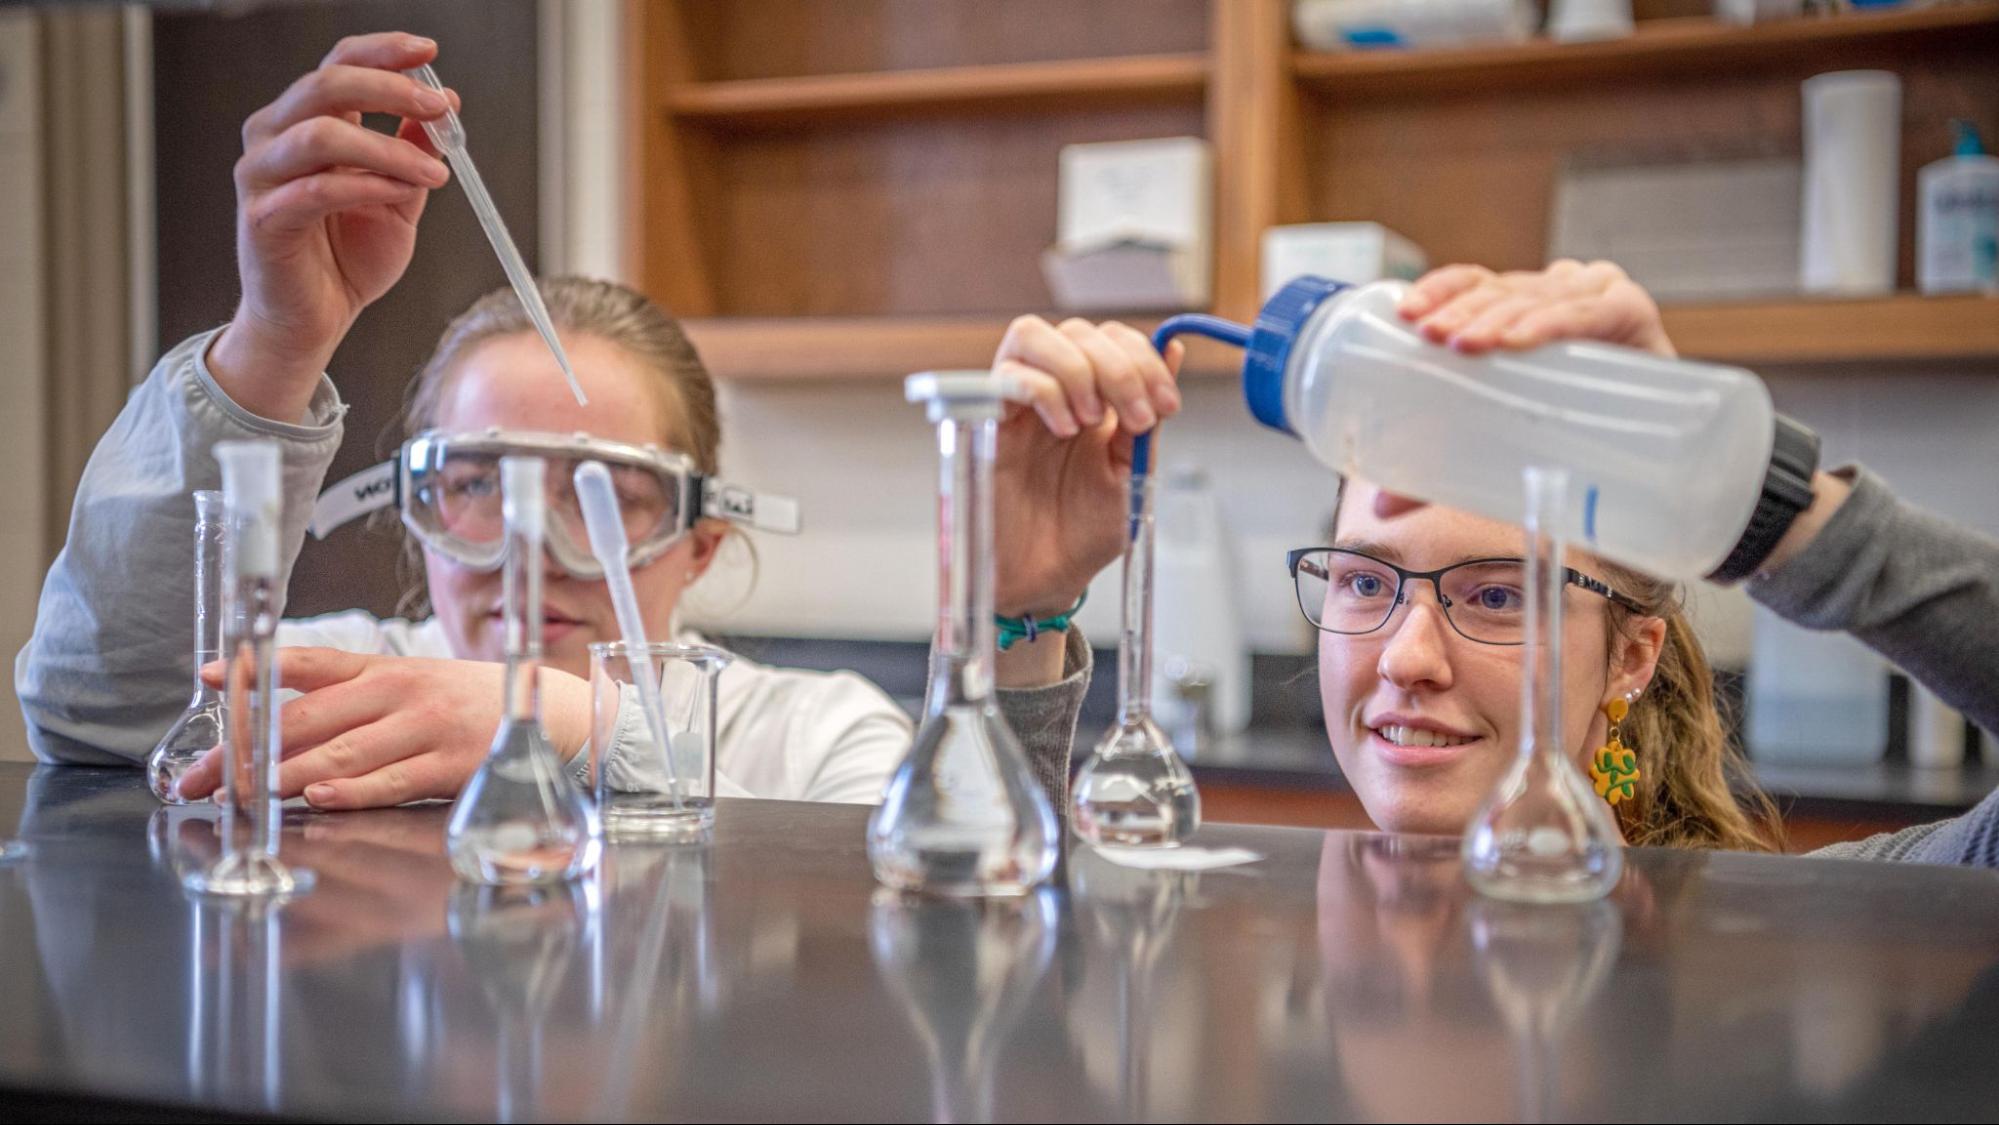 Two students dropping chemicals into glass beakers.